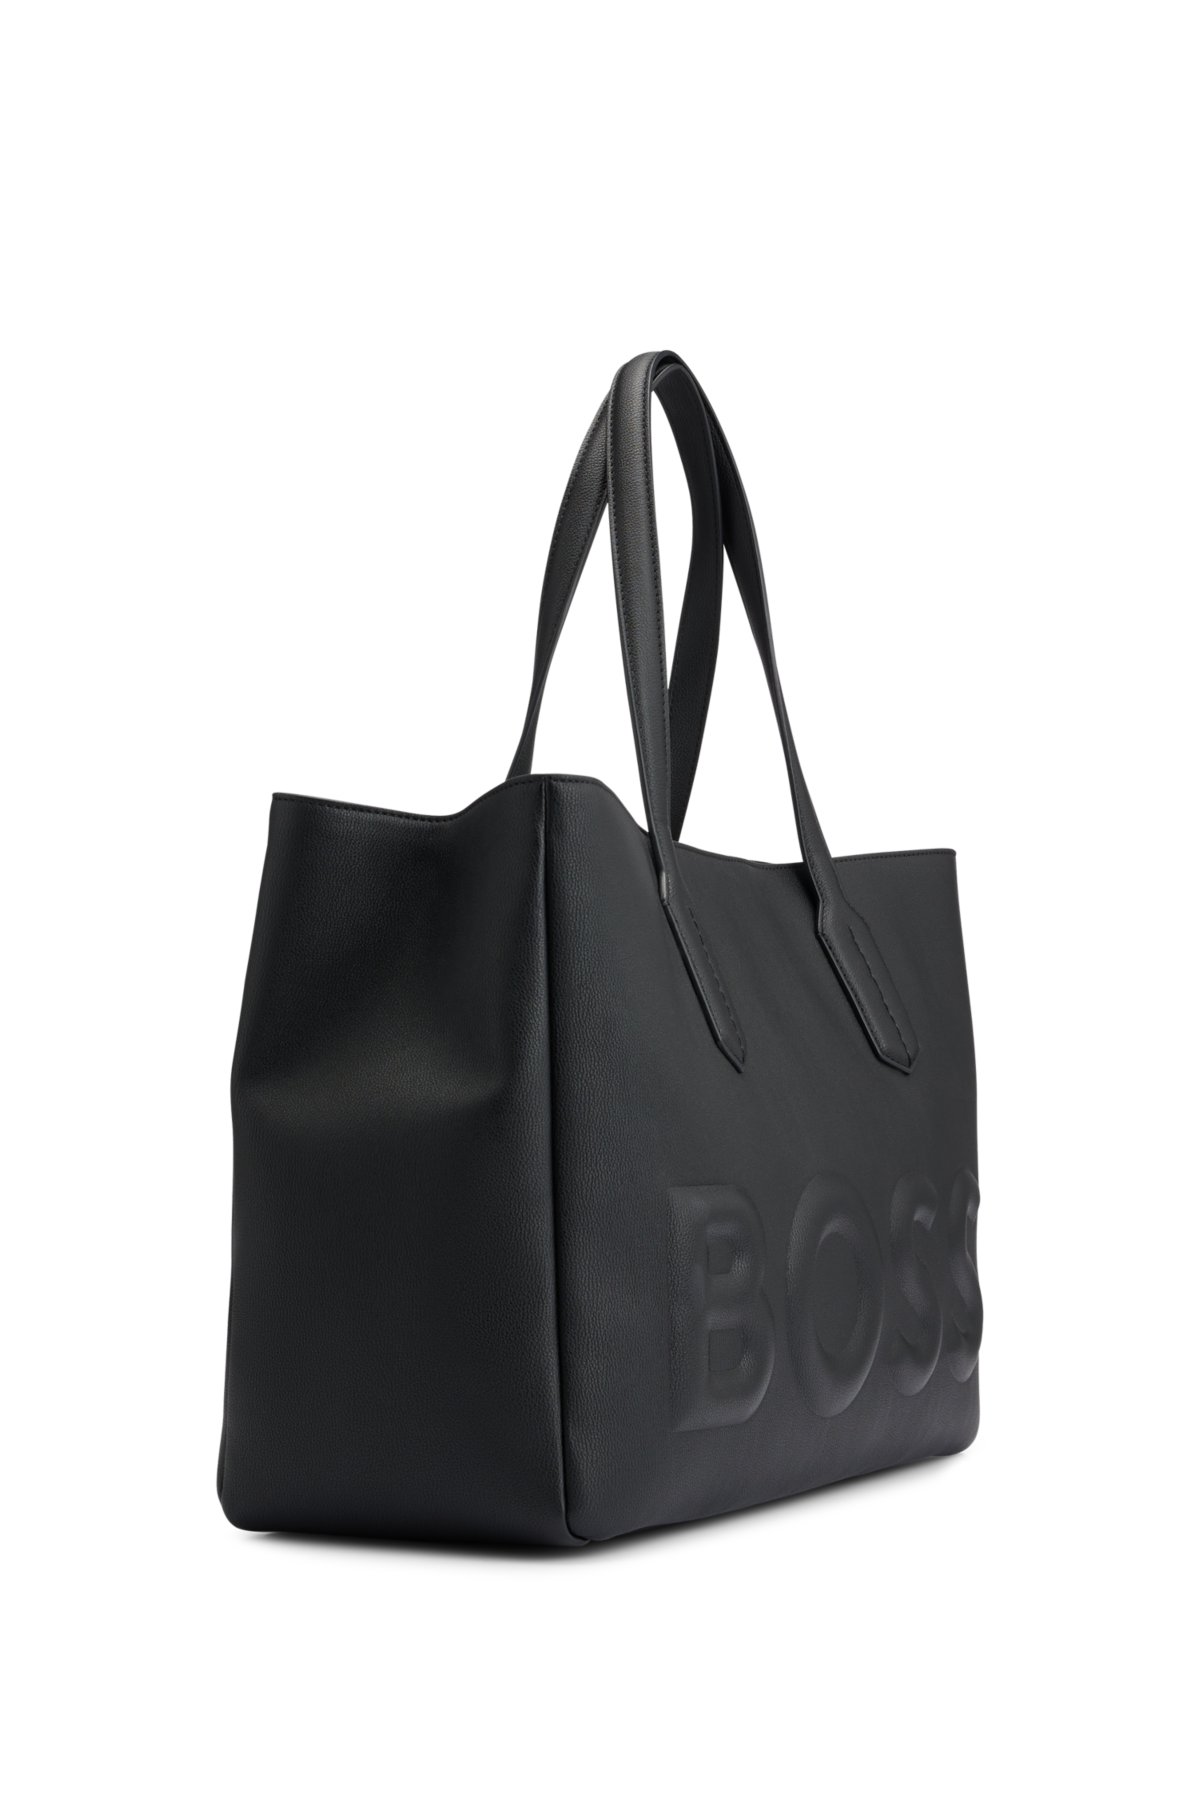 BOSS - Tote bag in logo debossed faux leather with